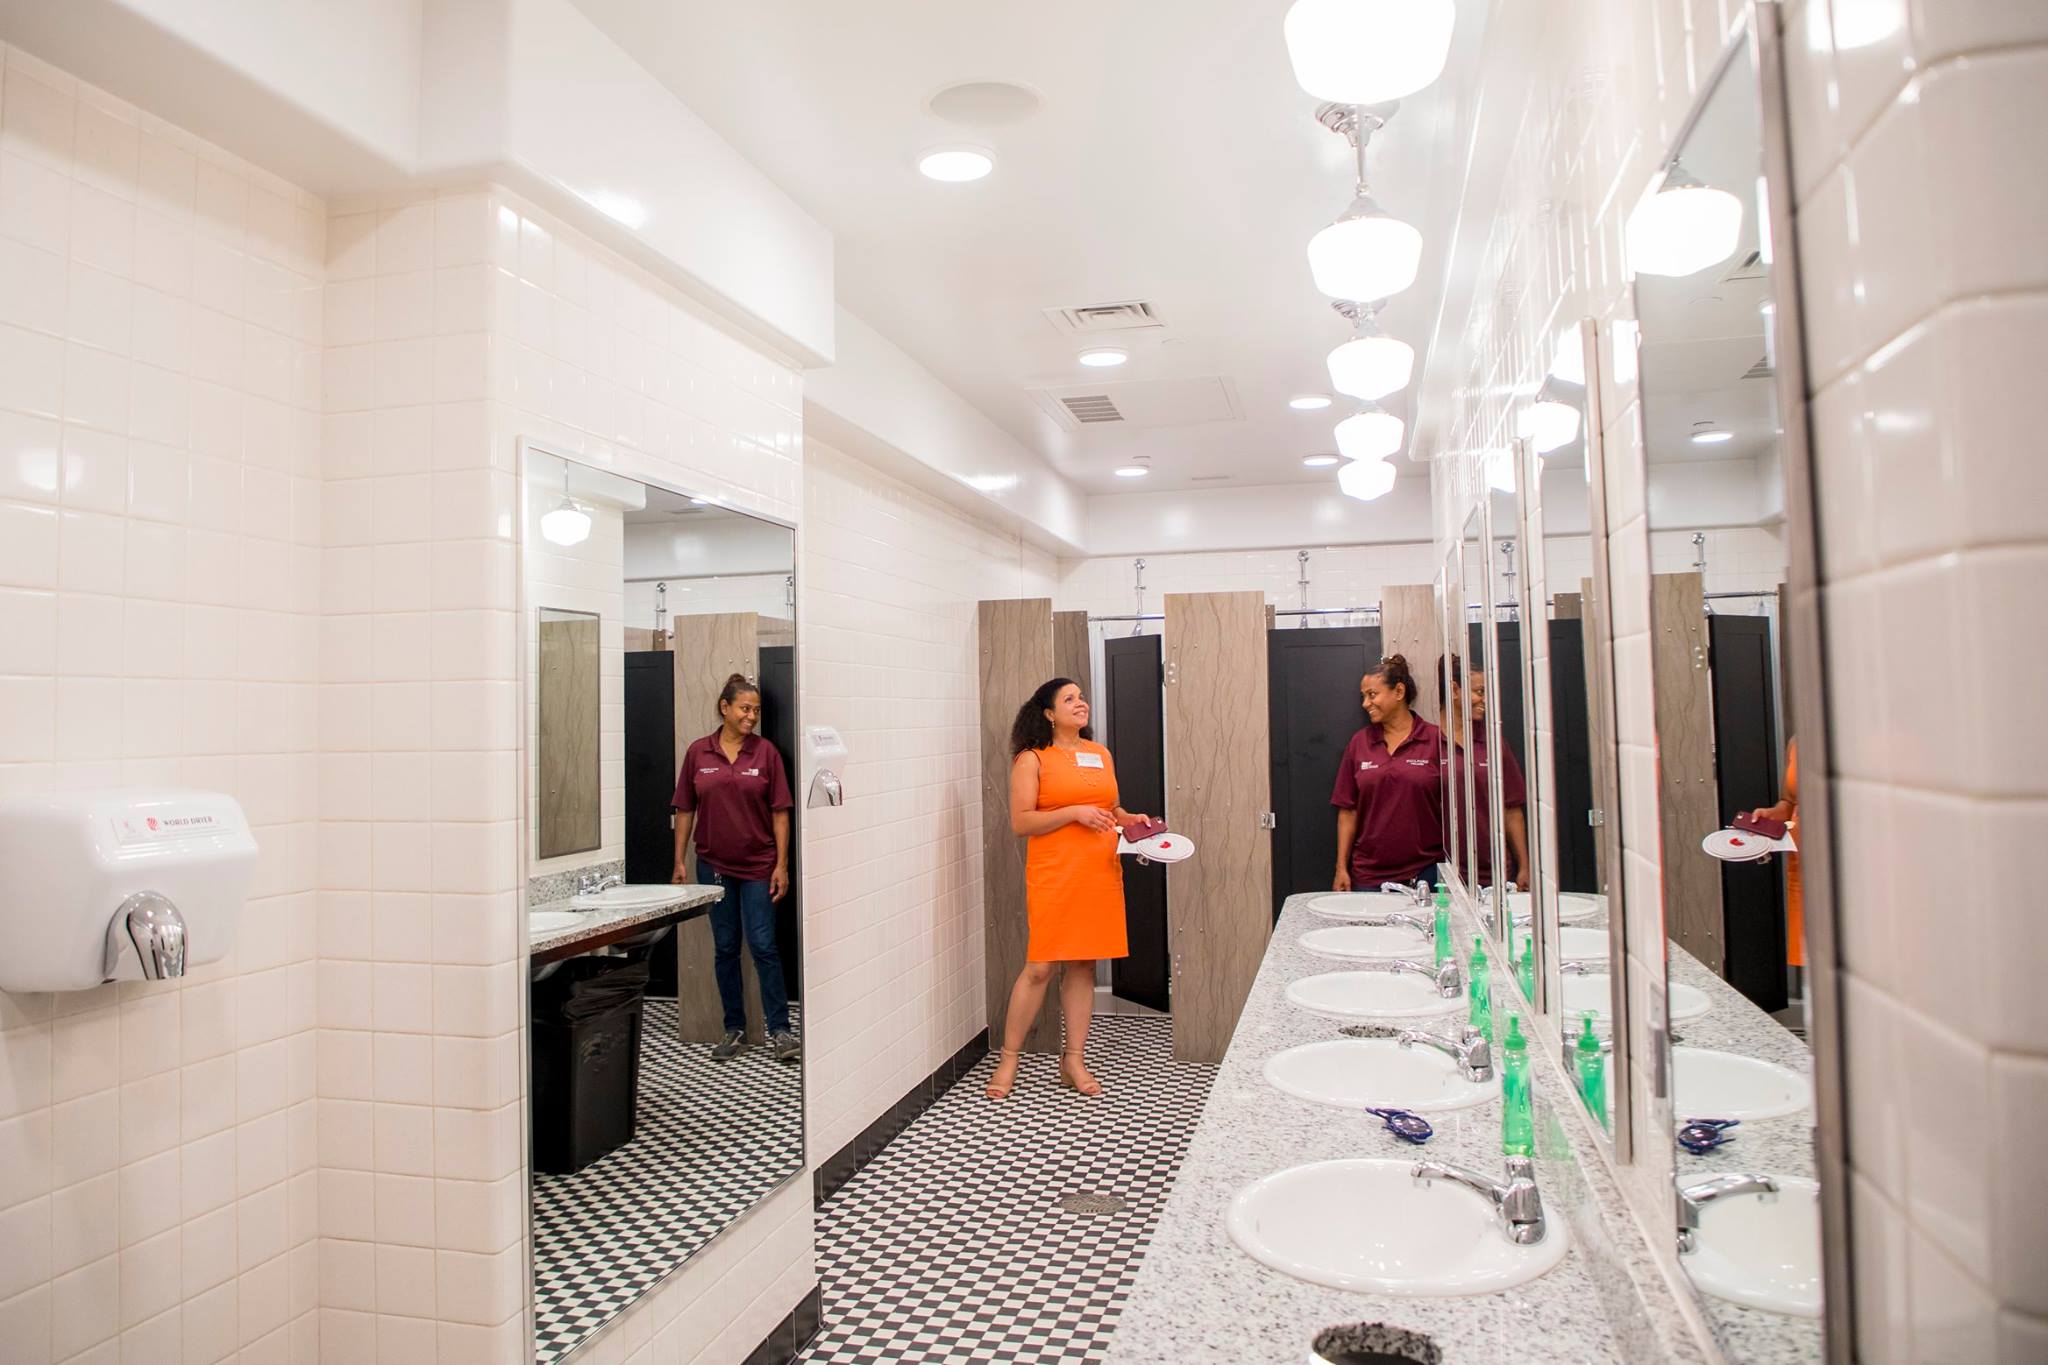 Refurbished bathrooms with bright lights and additional privacy await students in Binford.